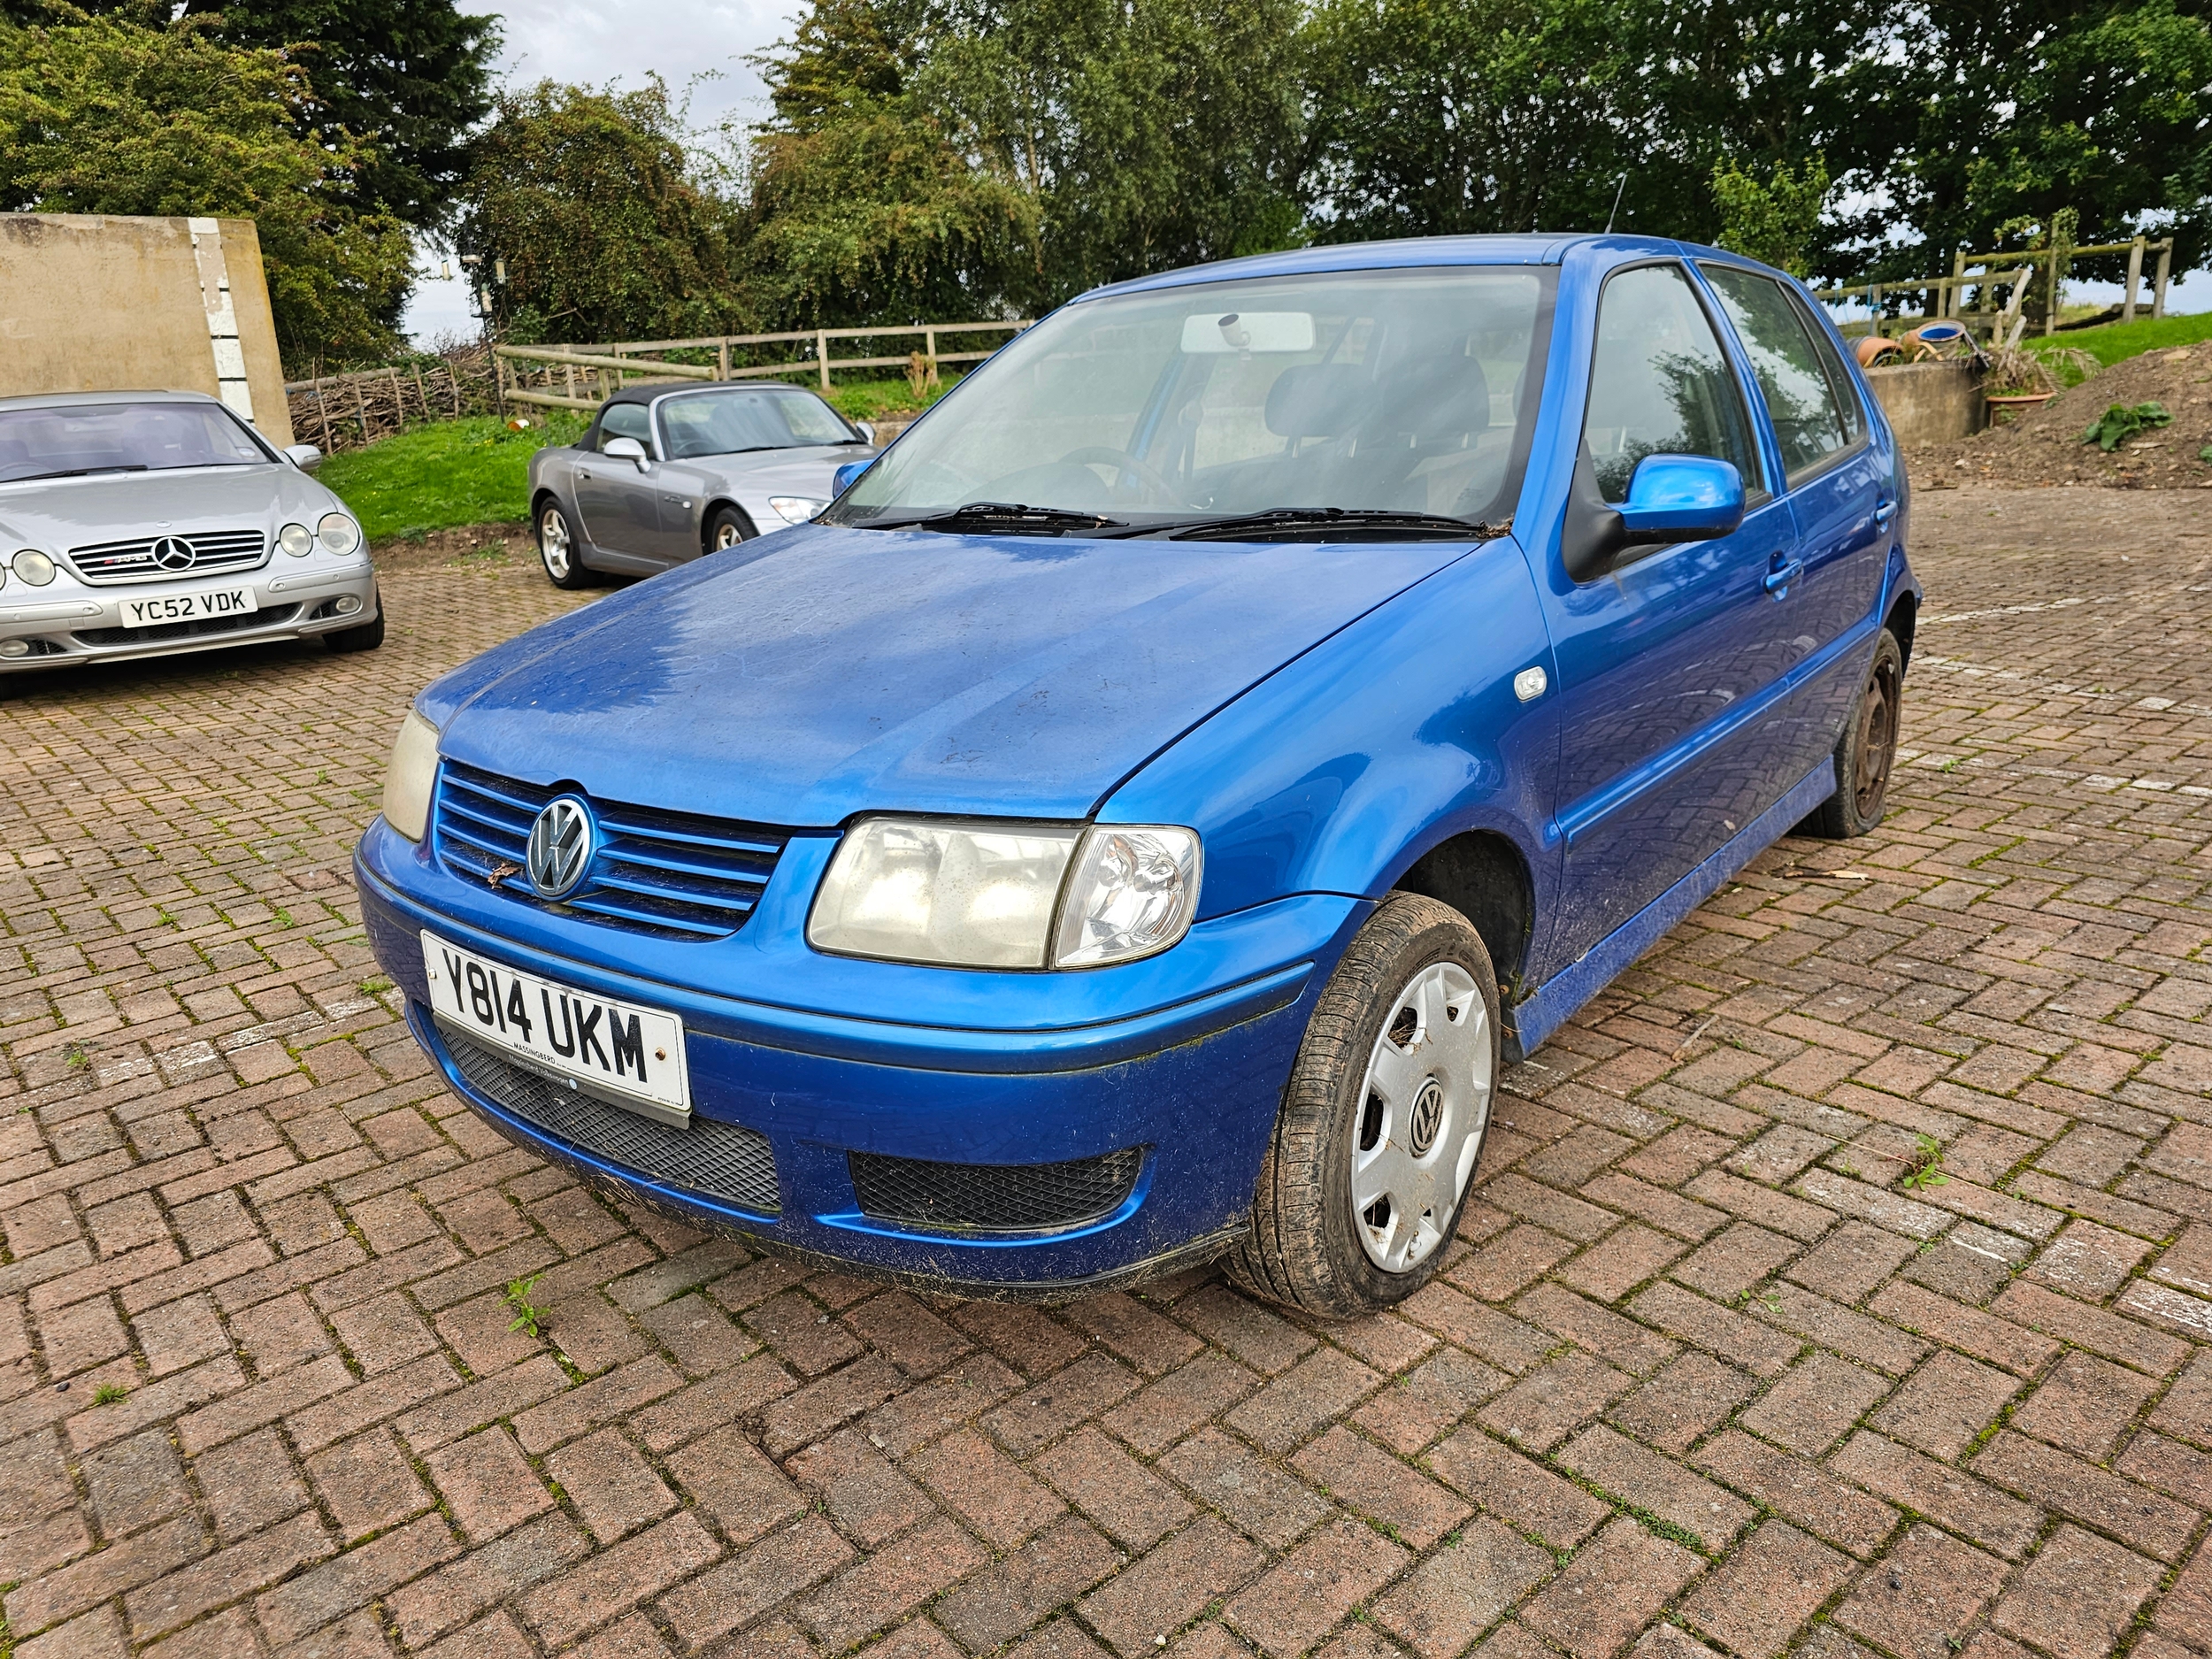 2001 VW POLO, 1390cc. Registration number Y814UKM. VIN number WVWZZZ6NZ1Y259513. Property of a - Image 2 of 11